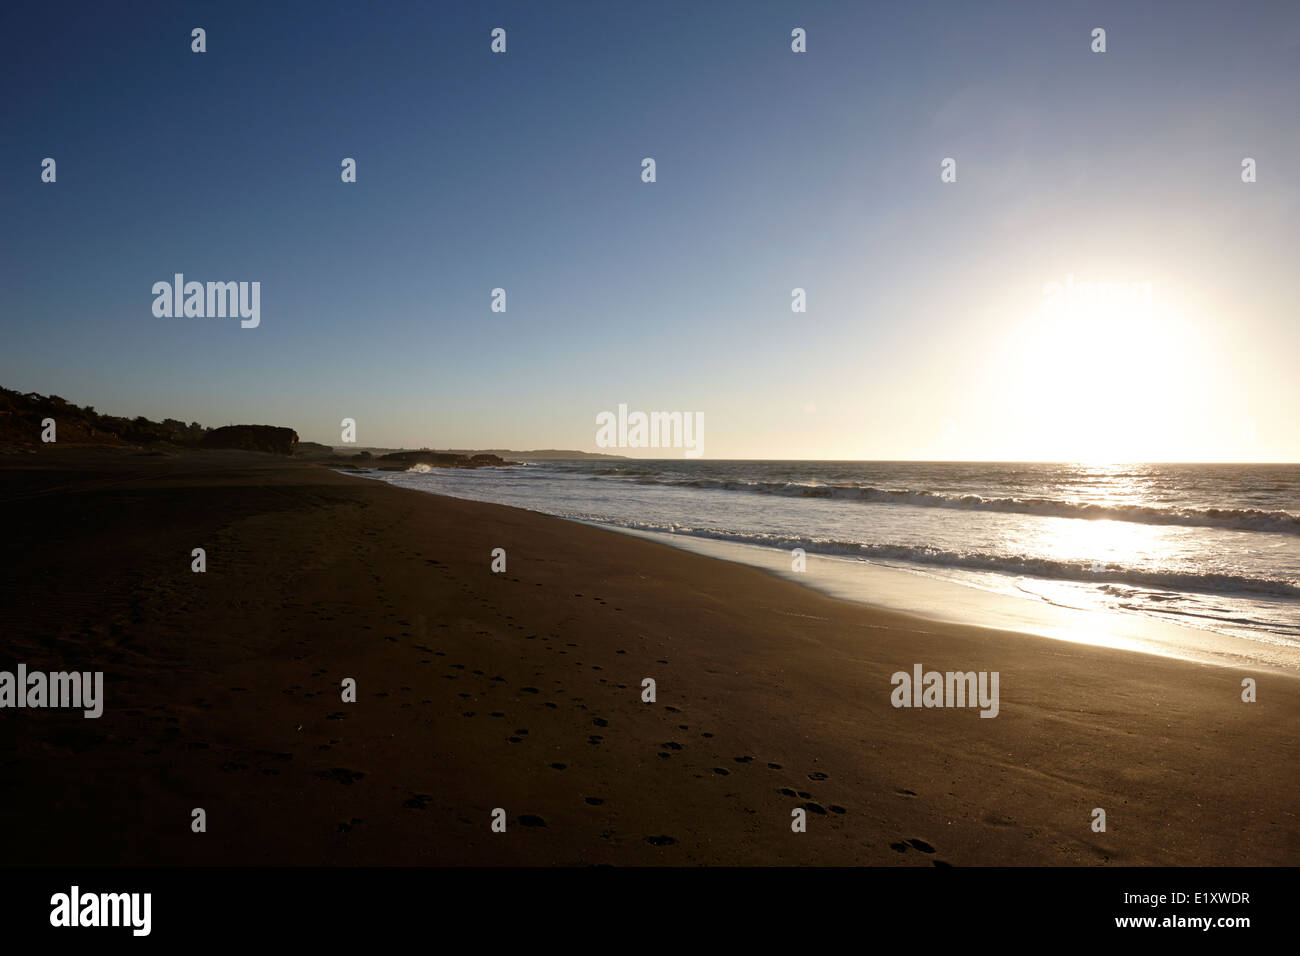 sun setting over sandy beach on the pacific ocean los pellines chile Stock Photo